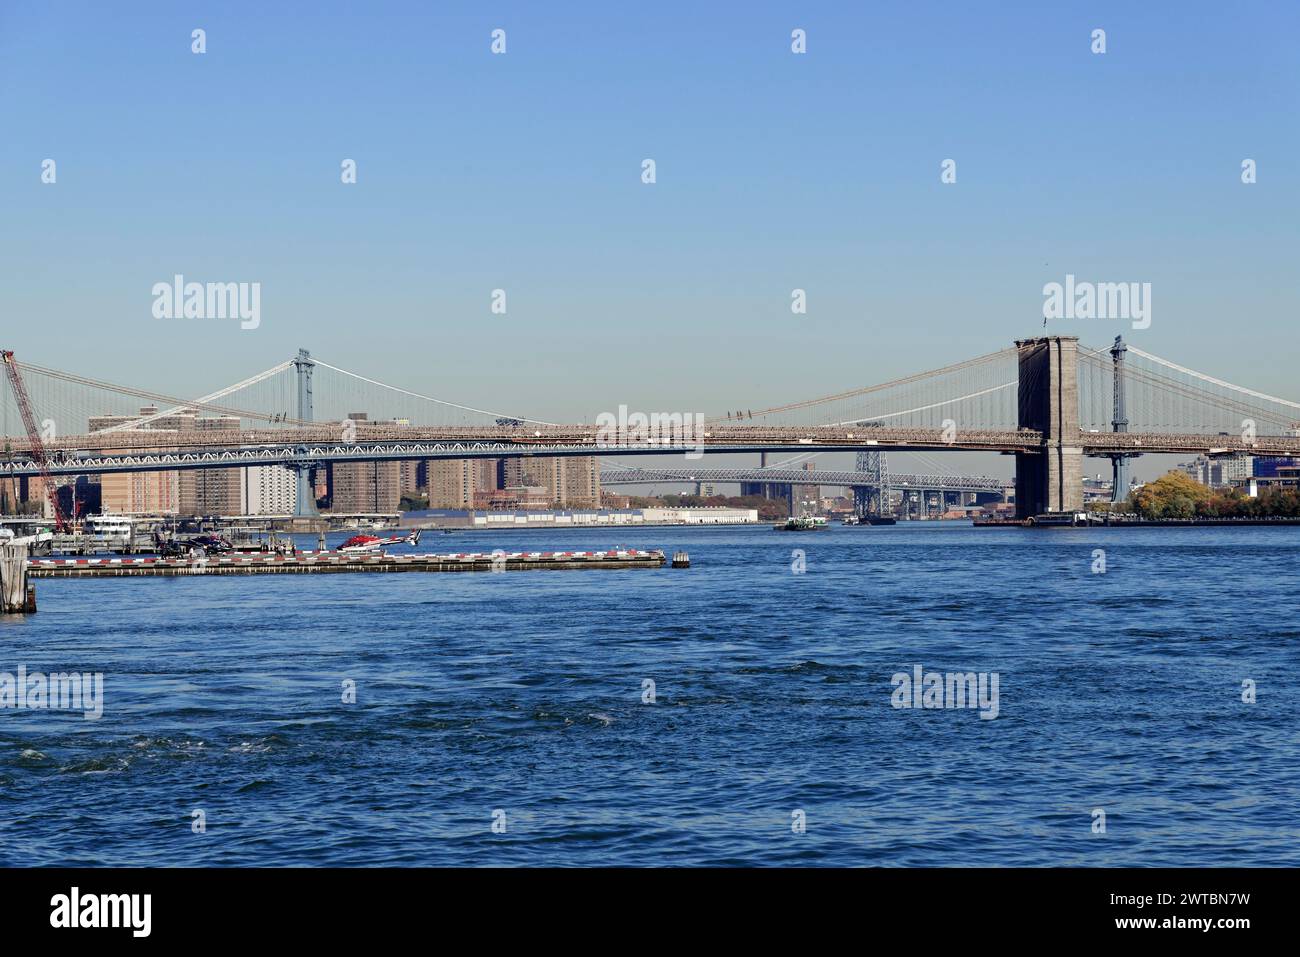 View of a bridge over a river with ships and clear blue sky, downtown Manhattan, Manhattan, New York City, USA, North America Stock Photo